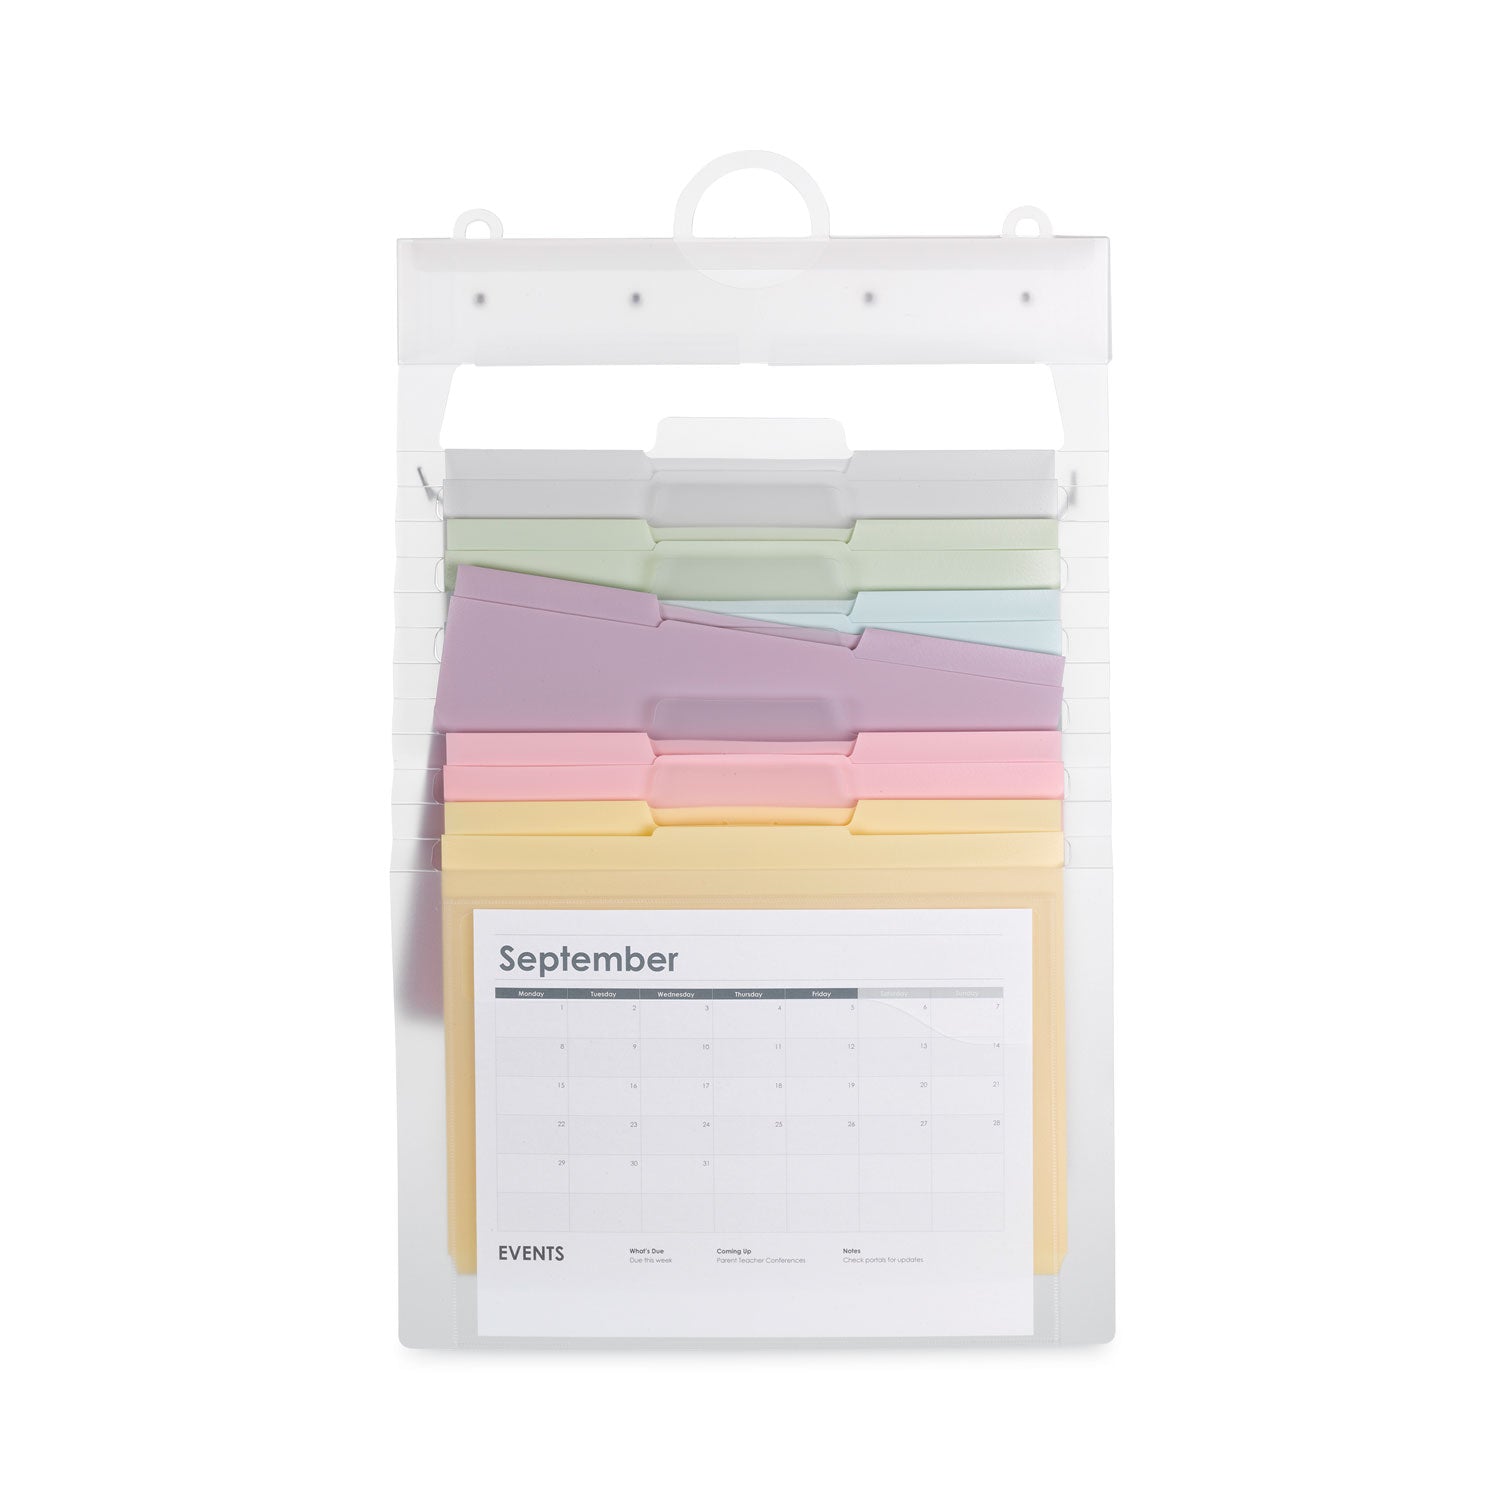 cascading-wall-organizer-6-sections-letter-size-1425-x-2425-blue-clear-gray-green-orange-pink-purple_smd92064 - 4